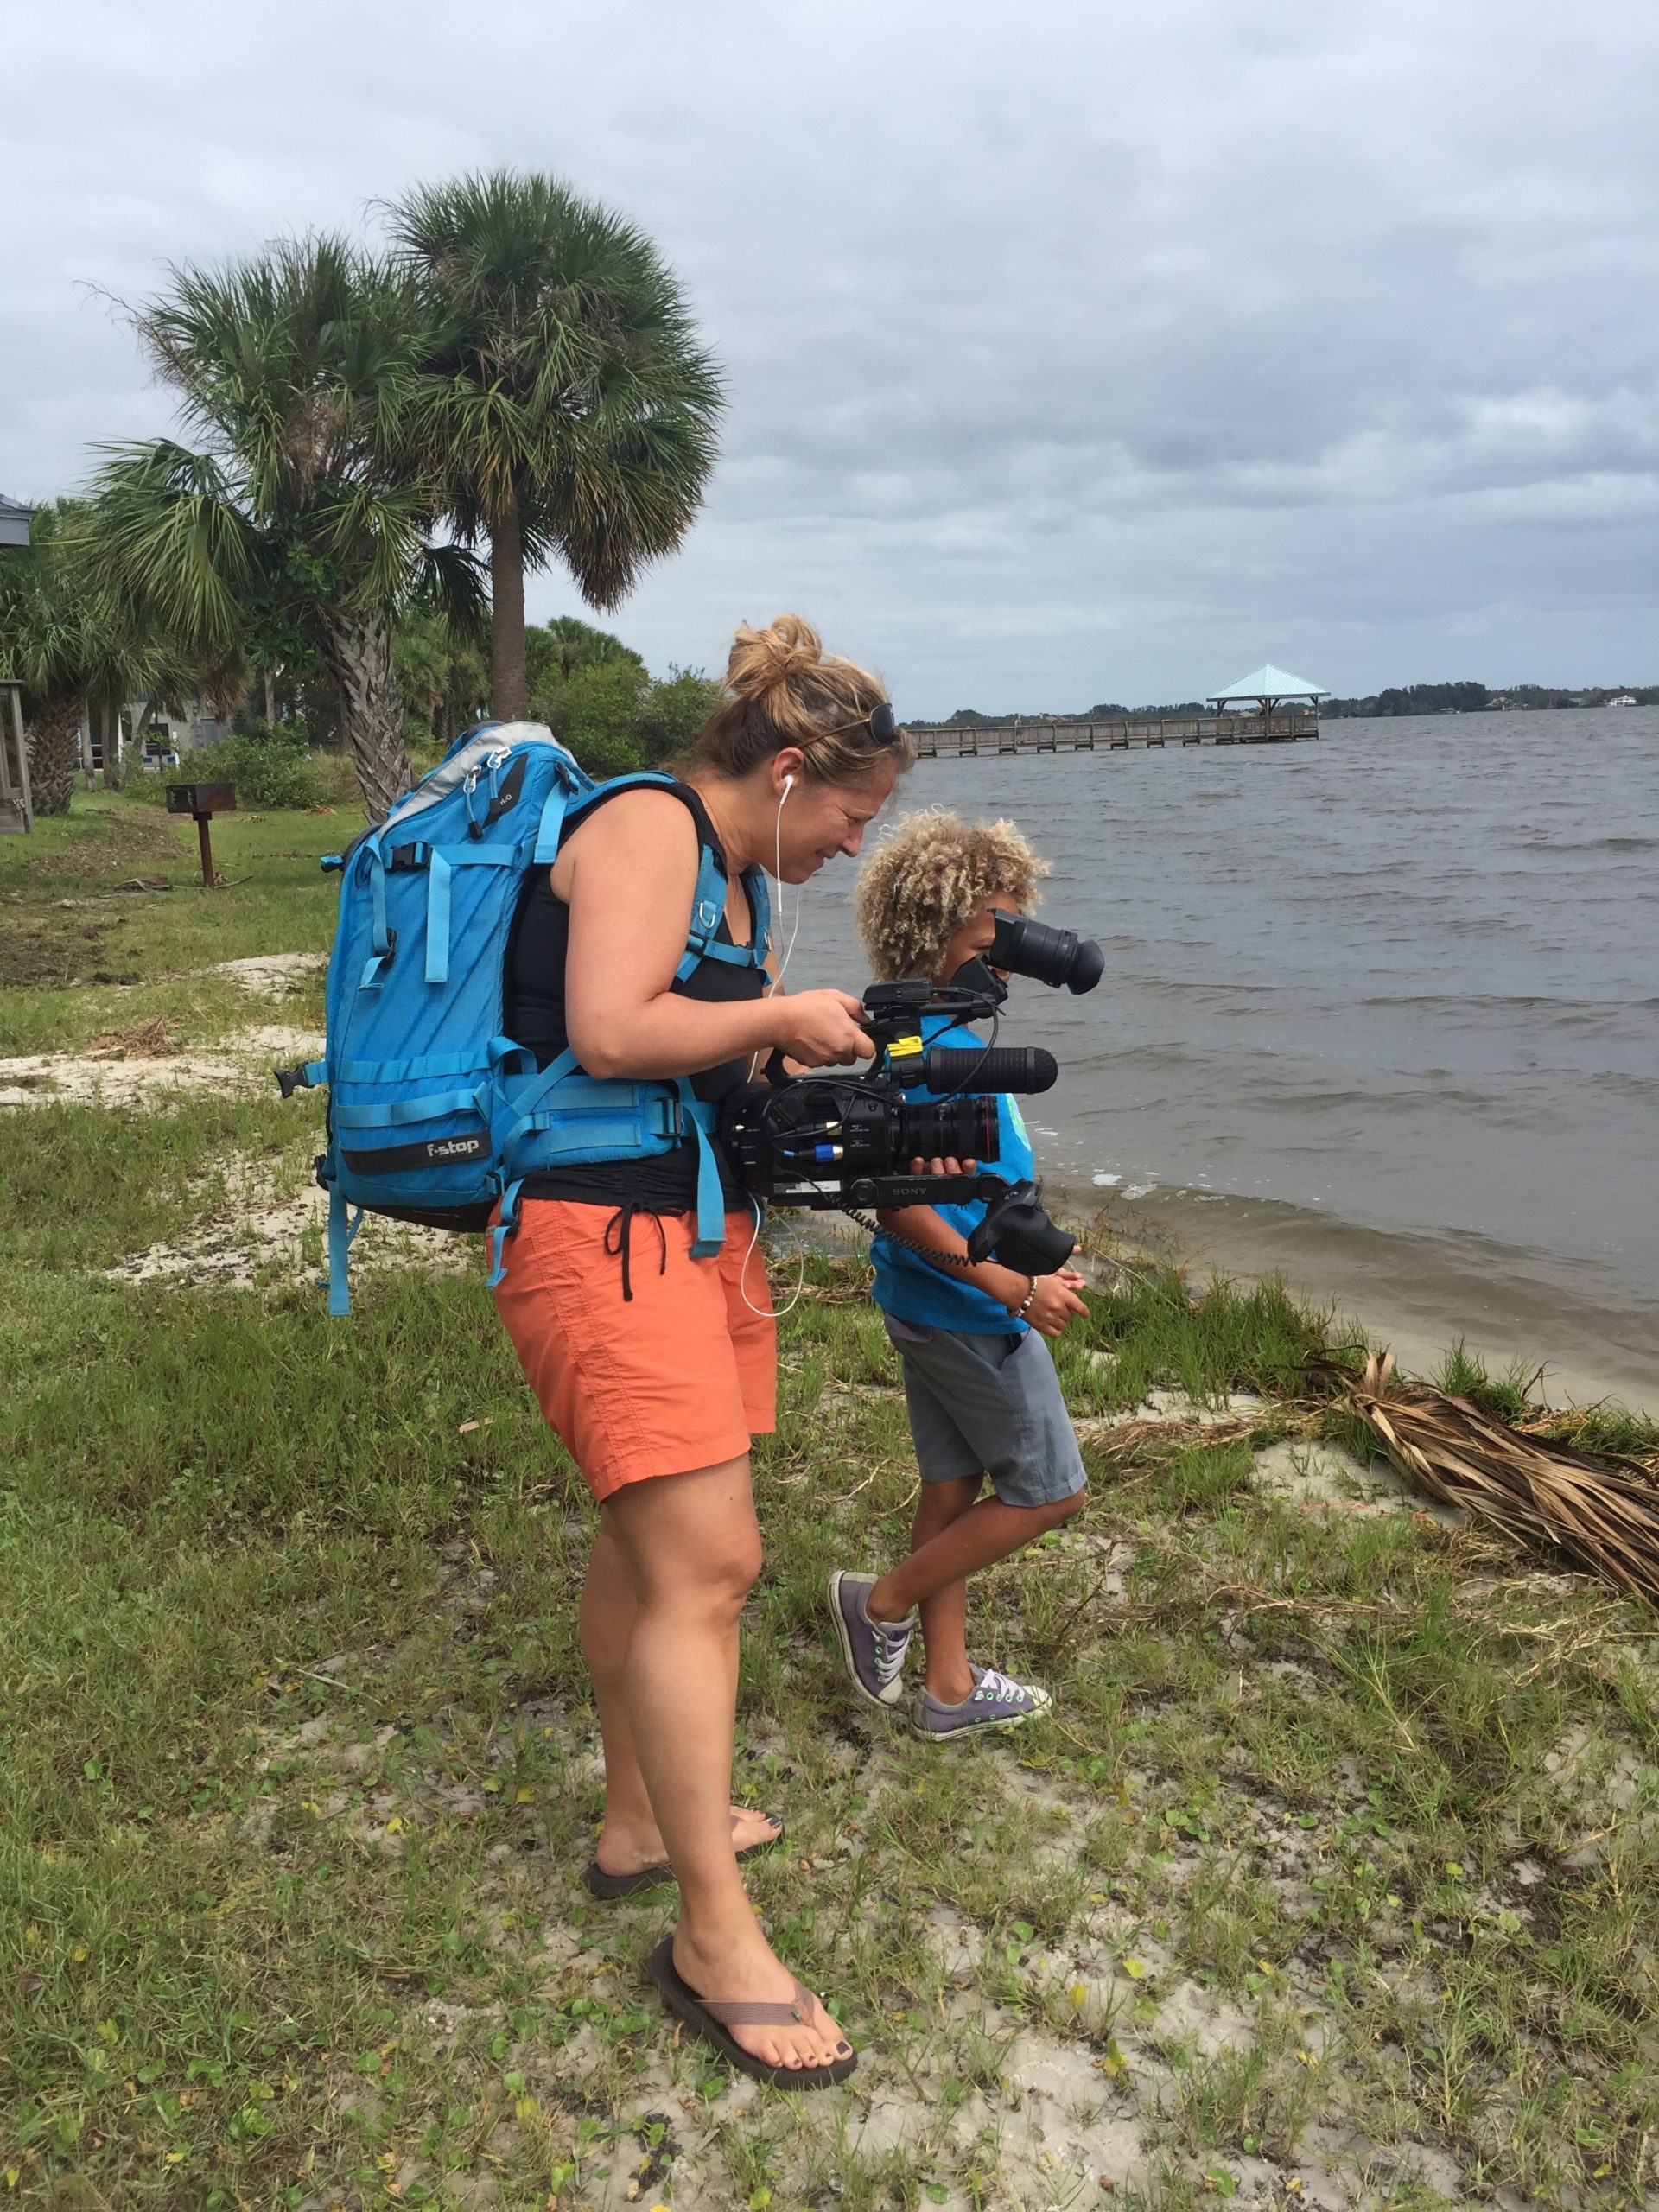 Christi Cooper filming Levi D., a plaintiff in the youth climate change case, near his Florida home after a storm.